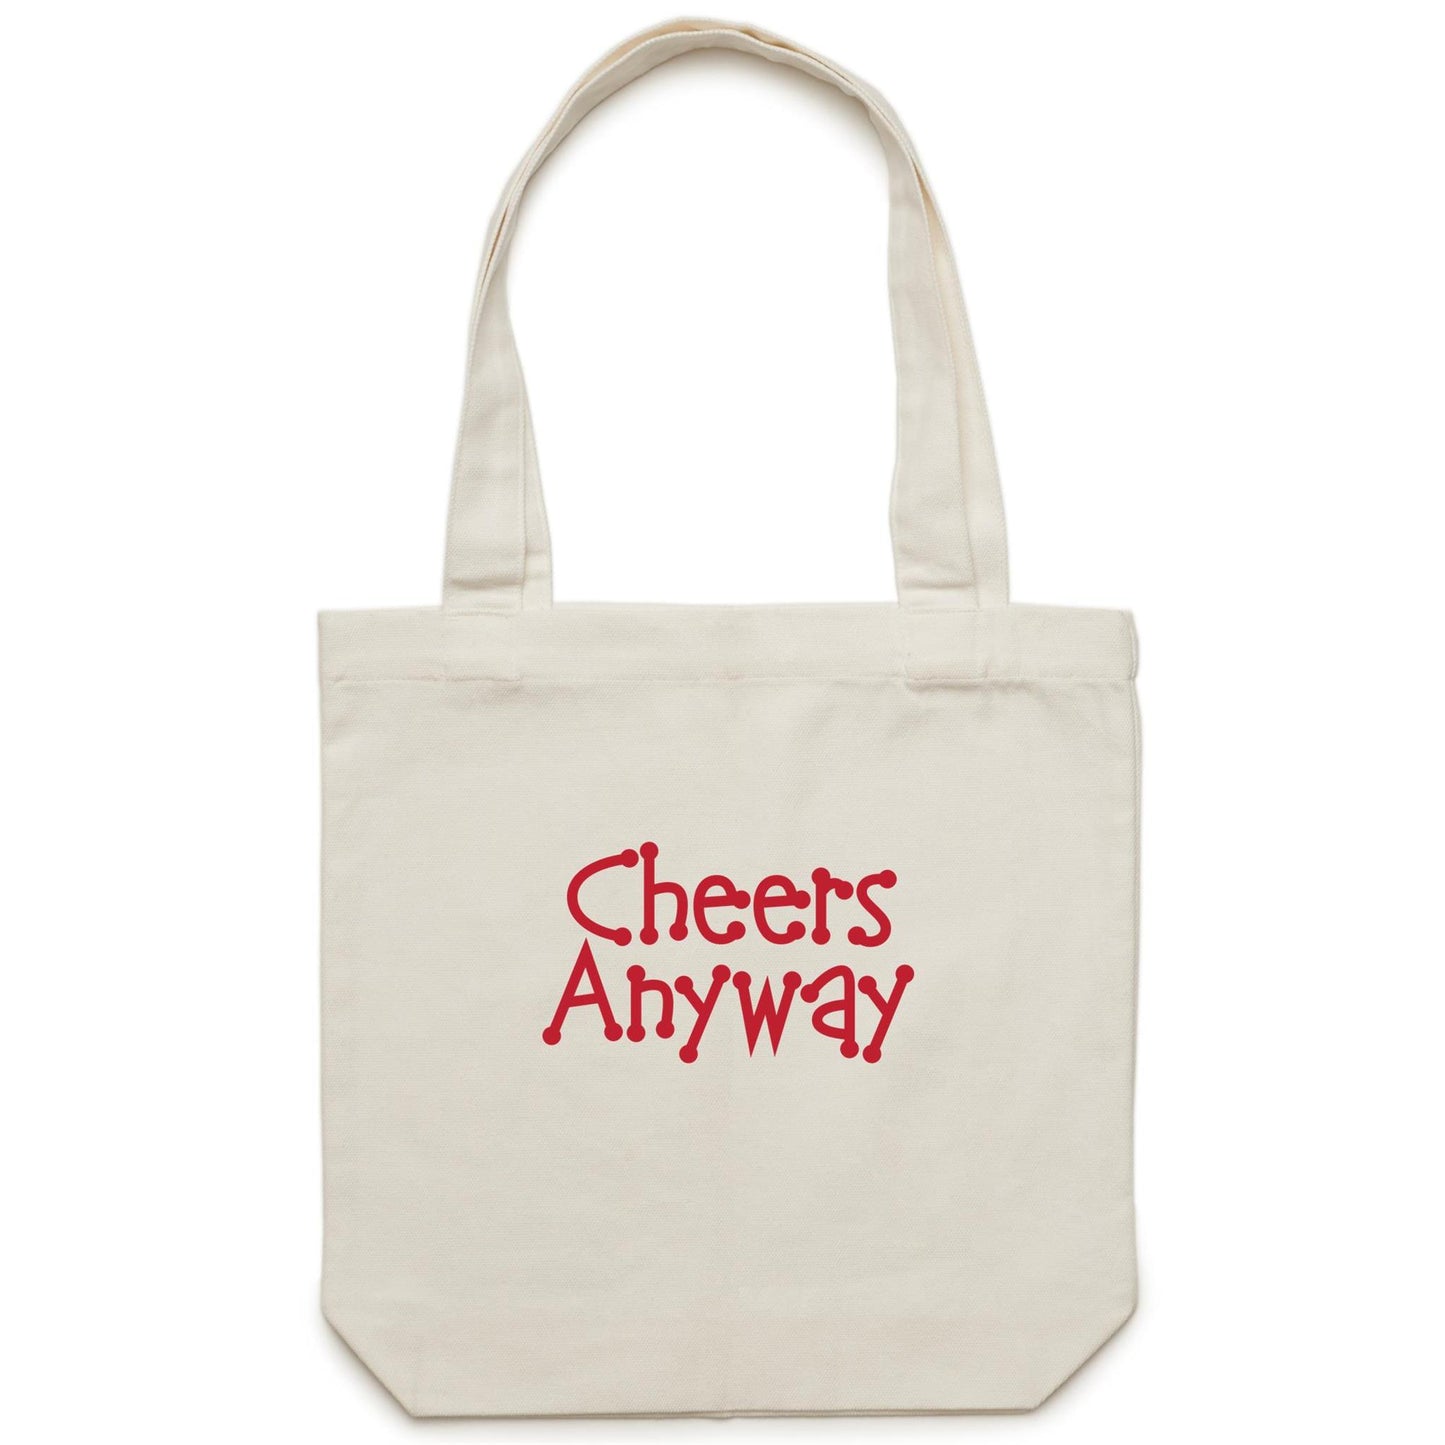 Cheers Anyway Canvas Totes